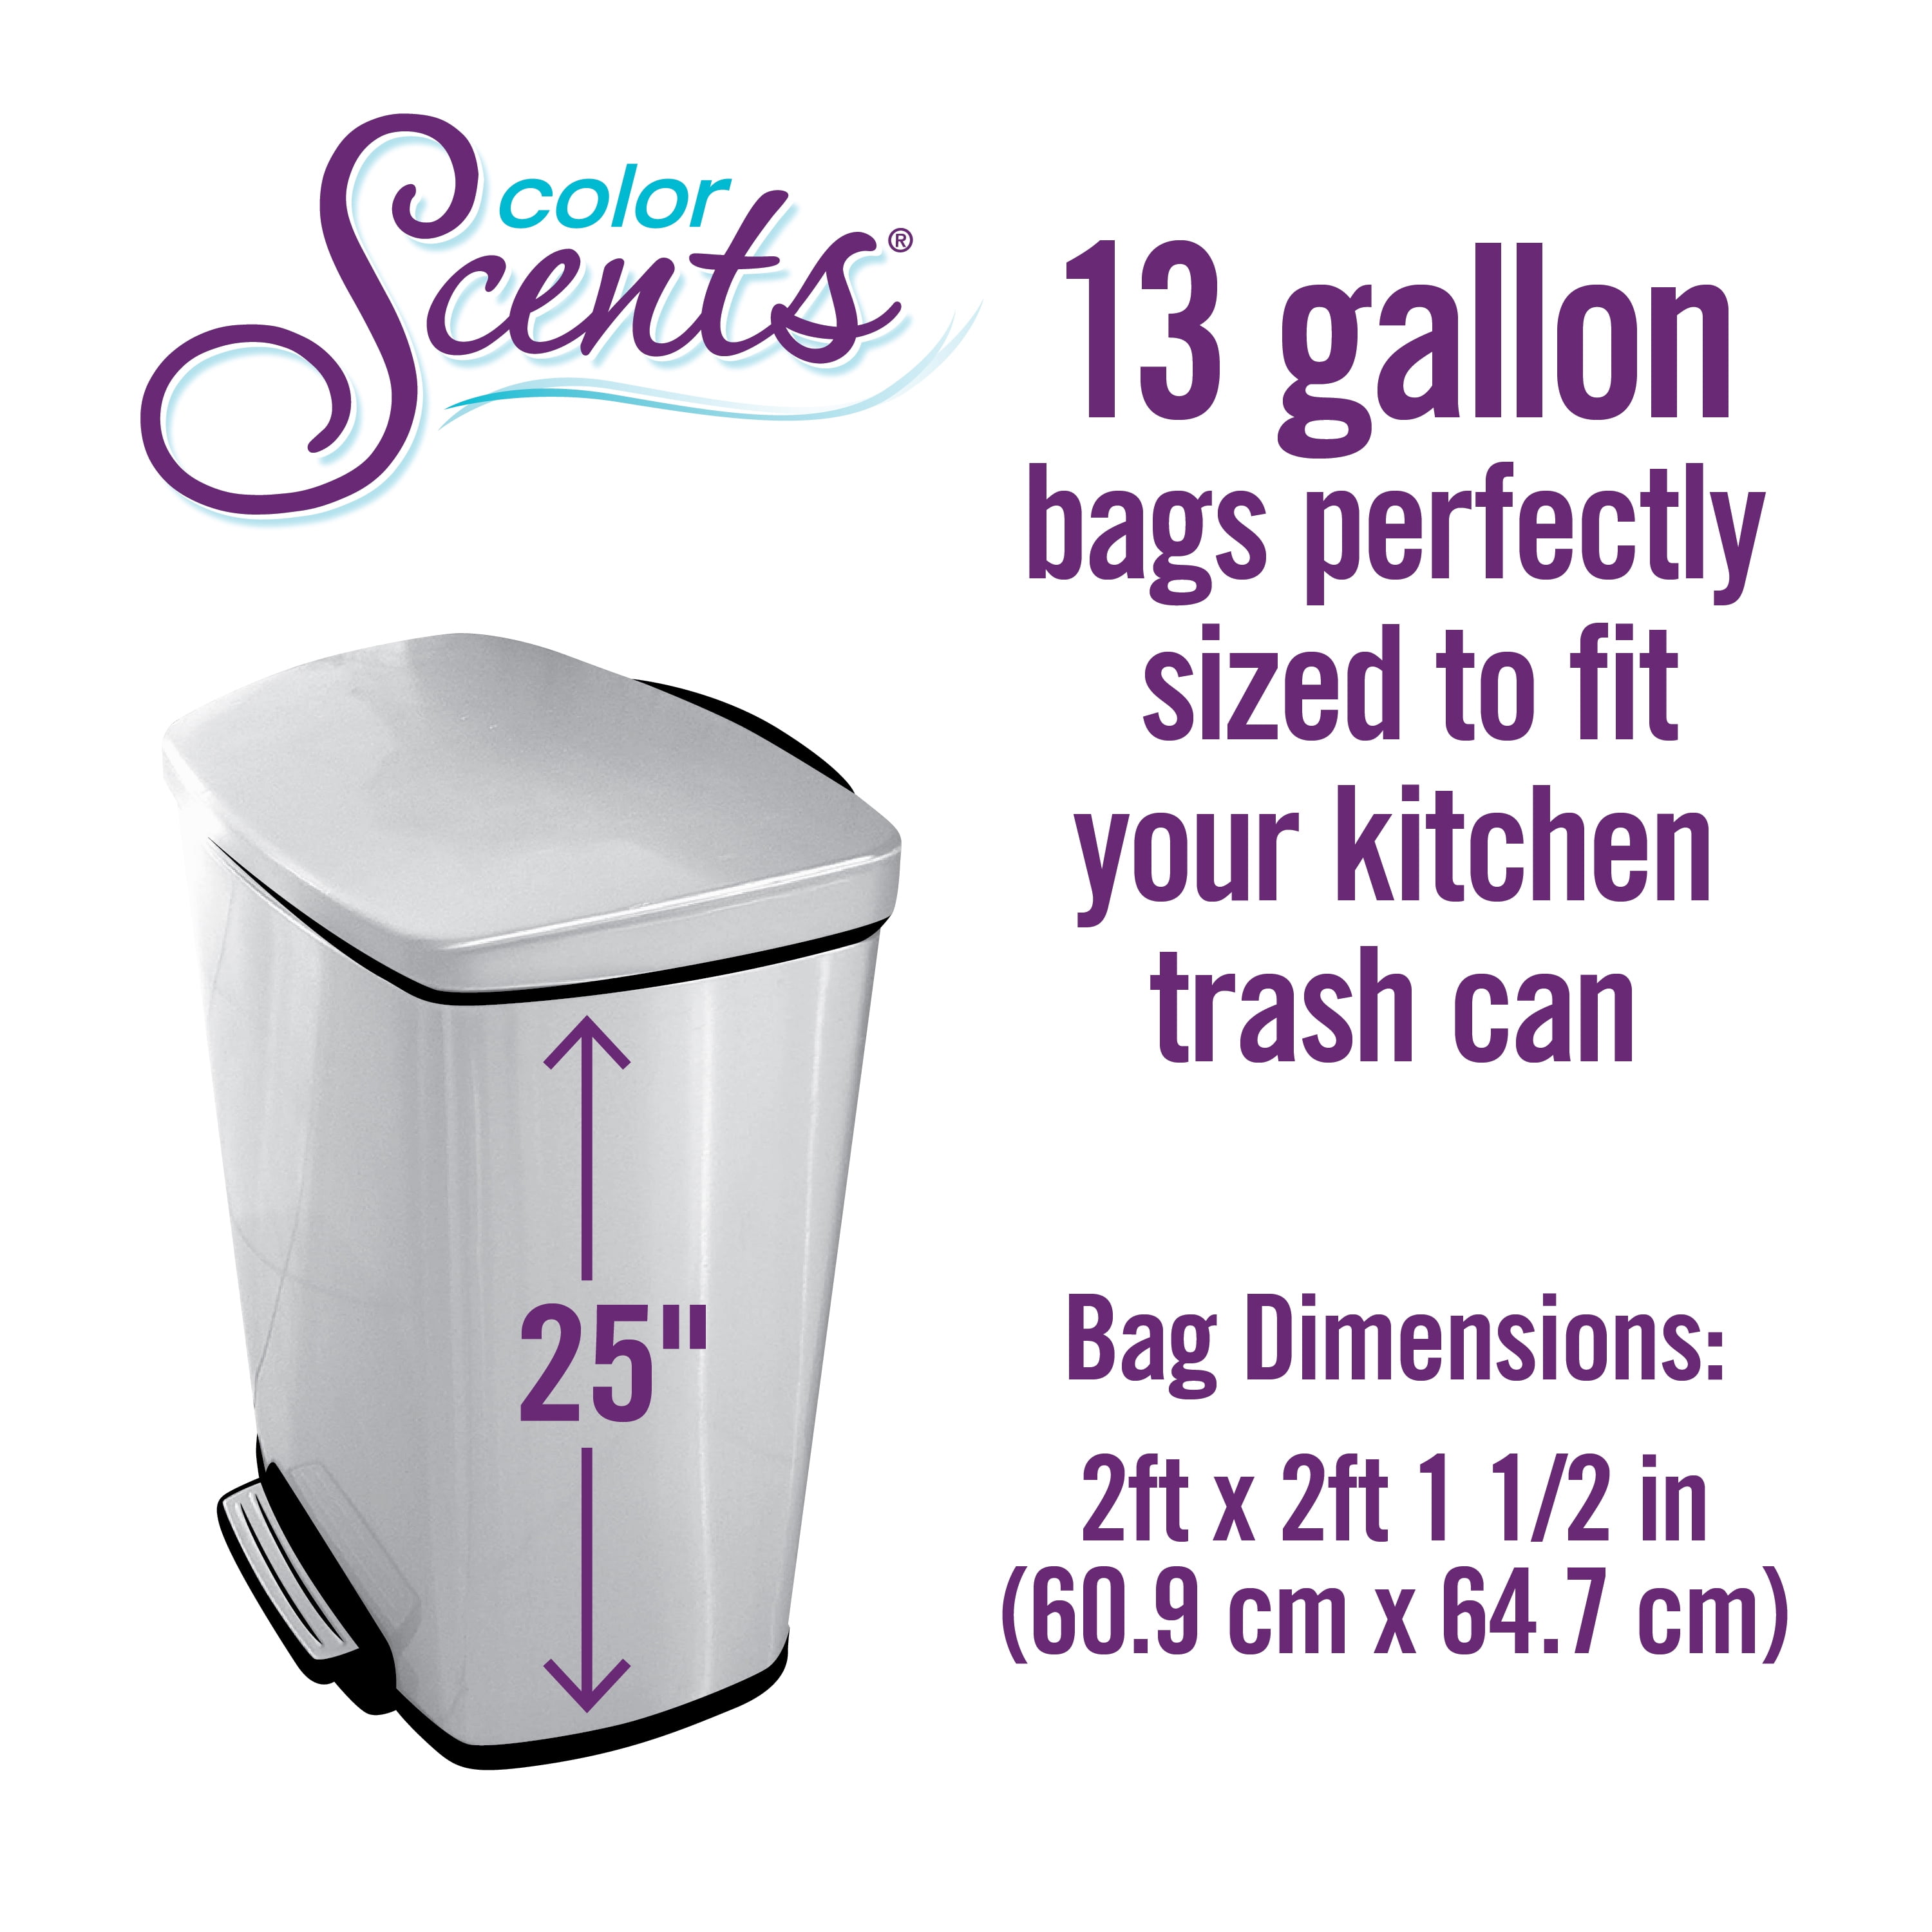 Color Scents - Tall Kitchen Trash Bags, Drawstring - 13 Gallon Trash Bags,  100 Bags - Scented Garbage Bags, White Bag in Lavender + Sage Scent (1 Pack